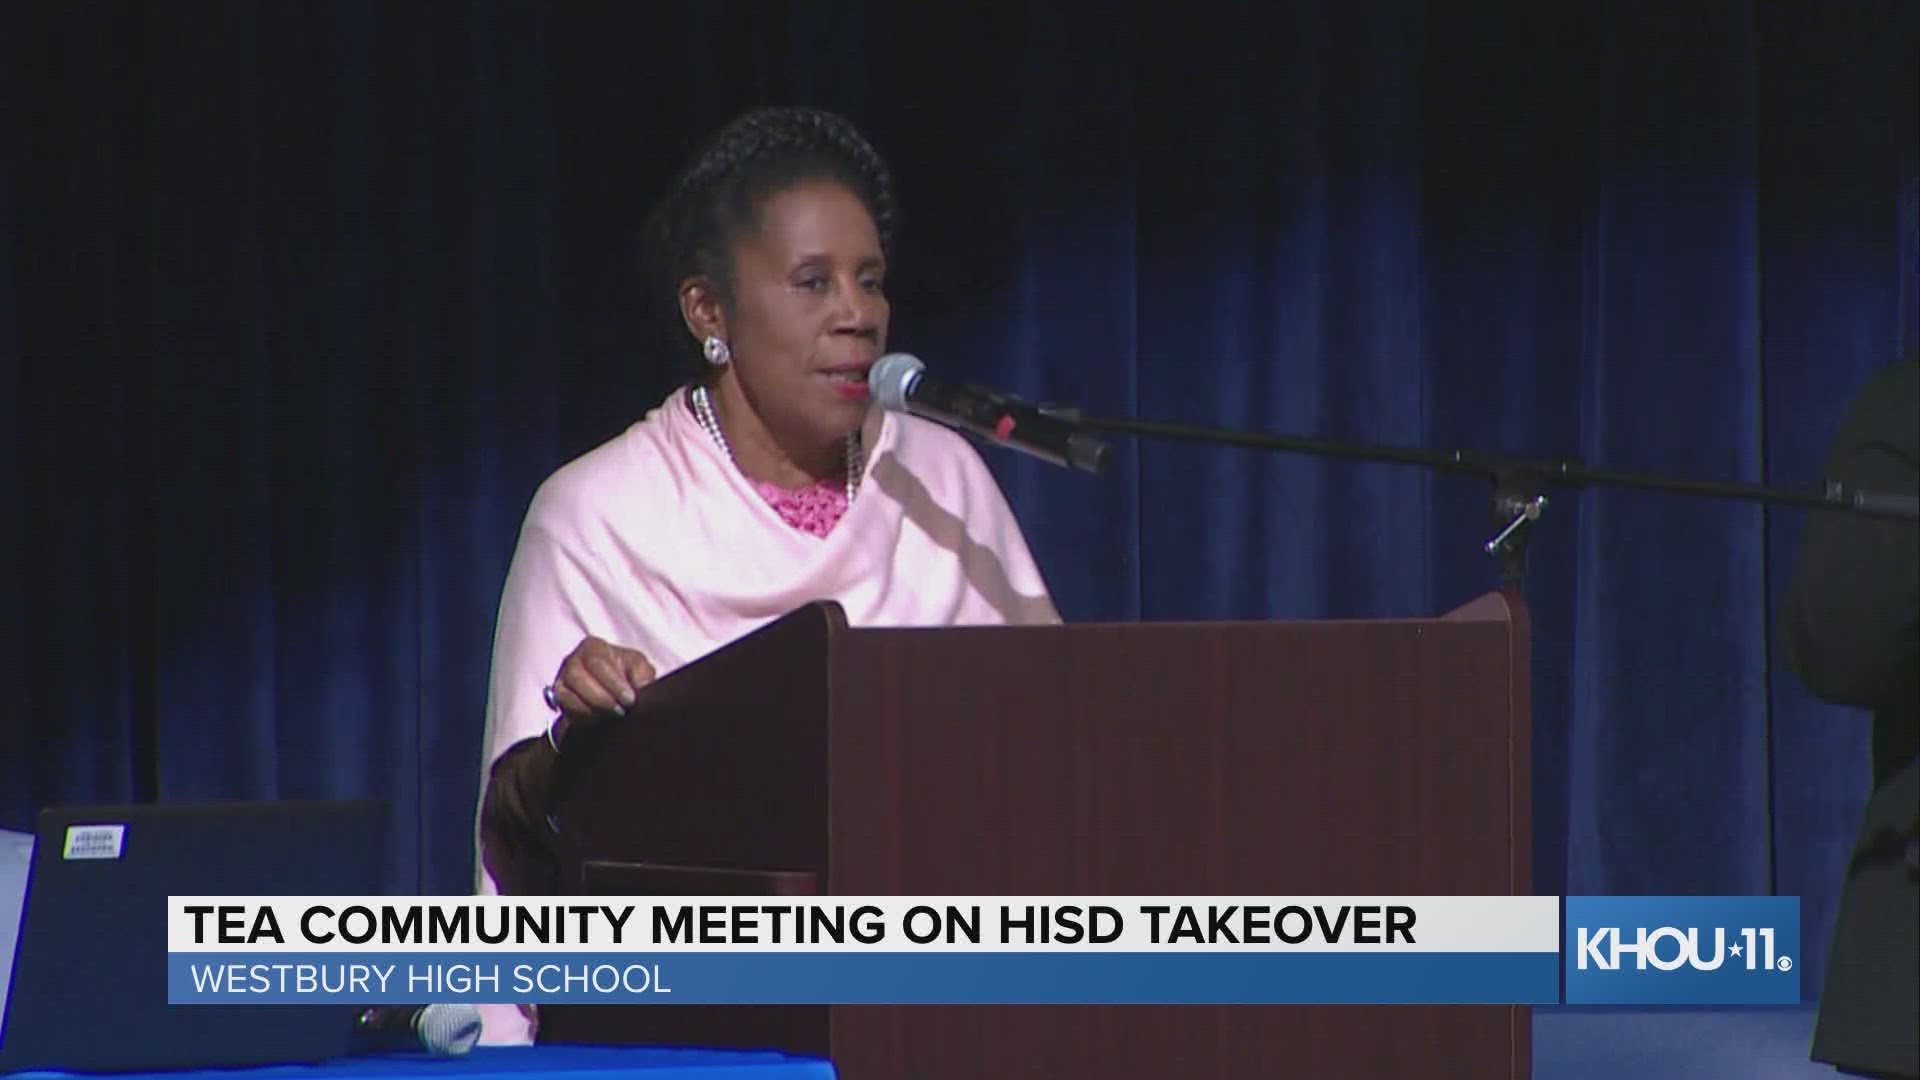 The affirmed on Tuesday that she's opposed to the HISD takeover.